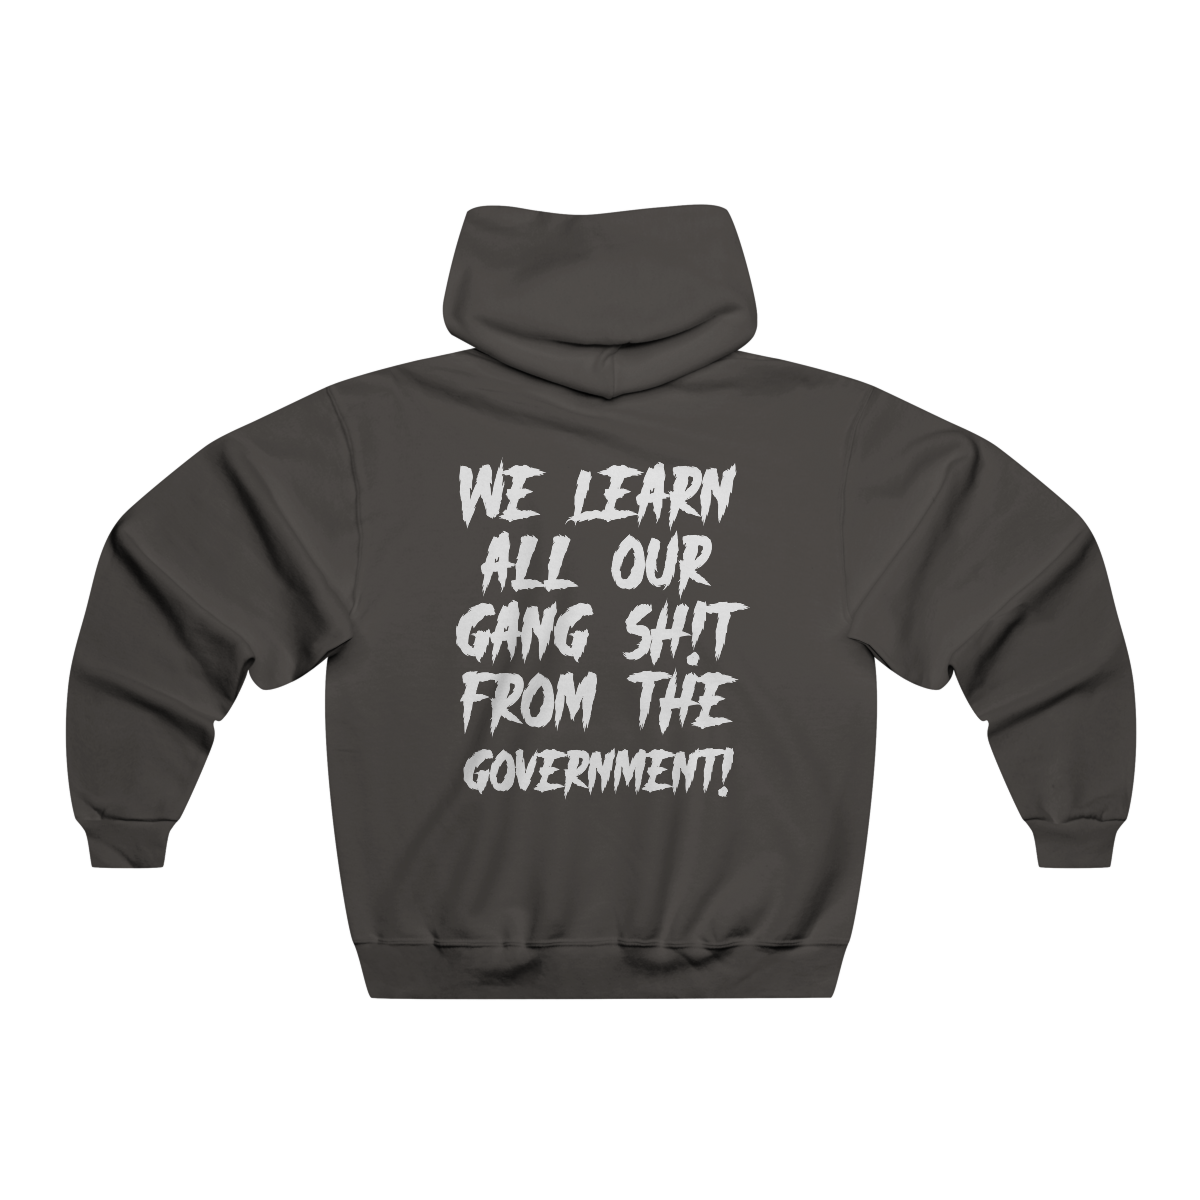 We Learned from the Government Hooded Sweatshirt